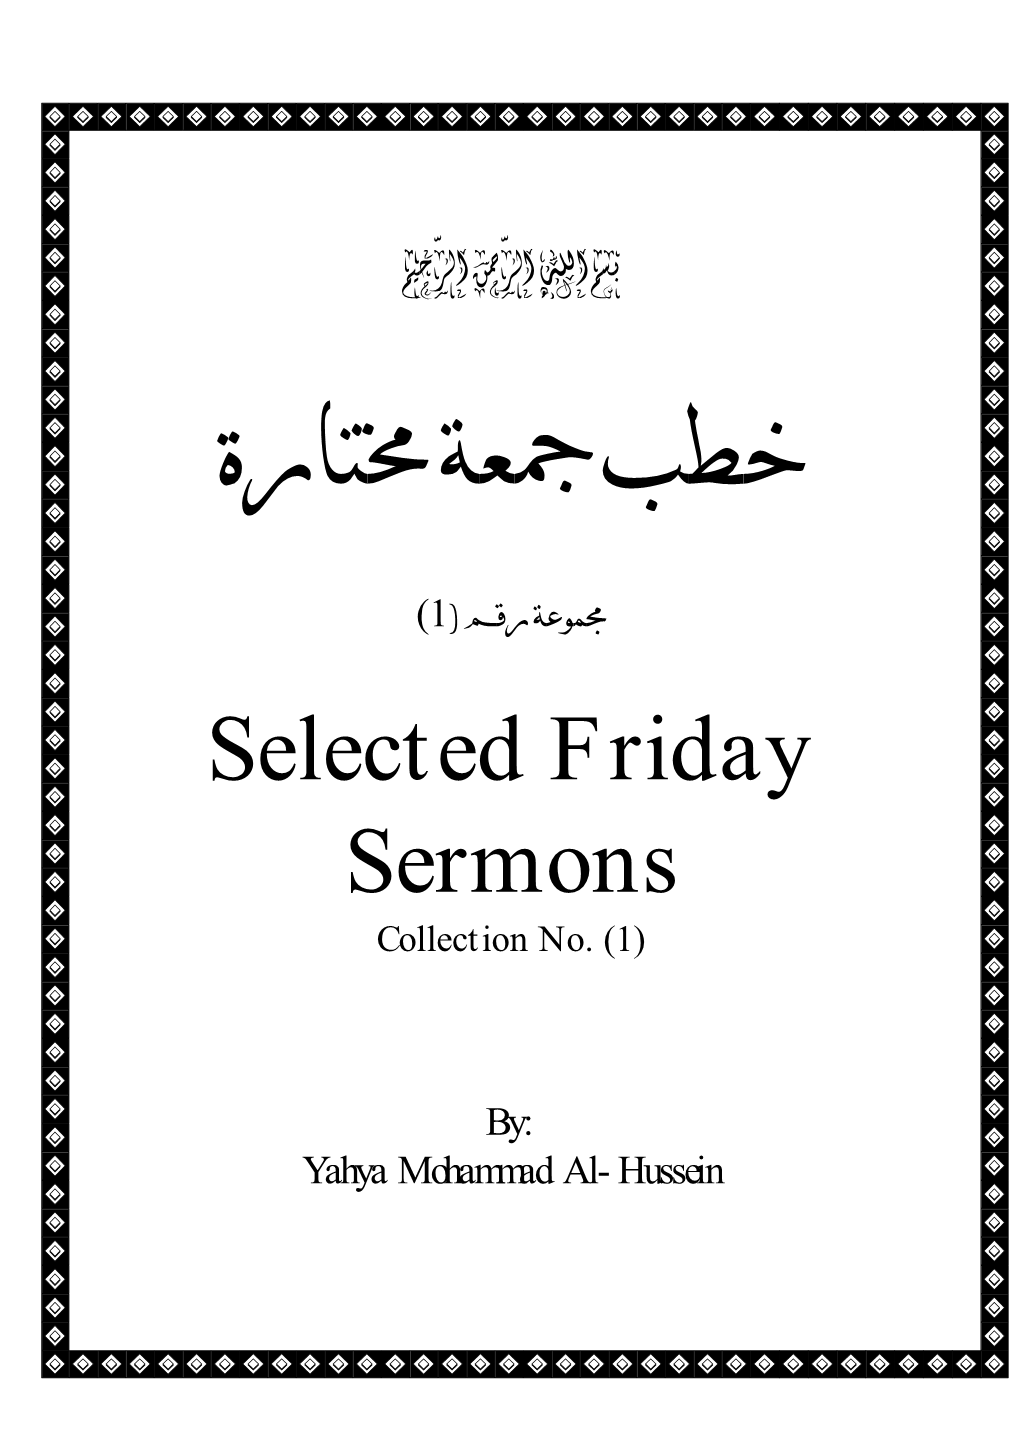 Selected Friday Sermons Collection No